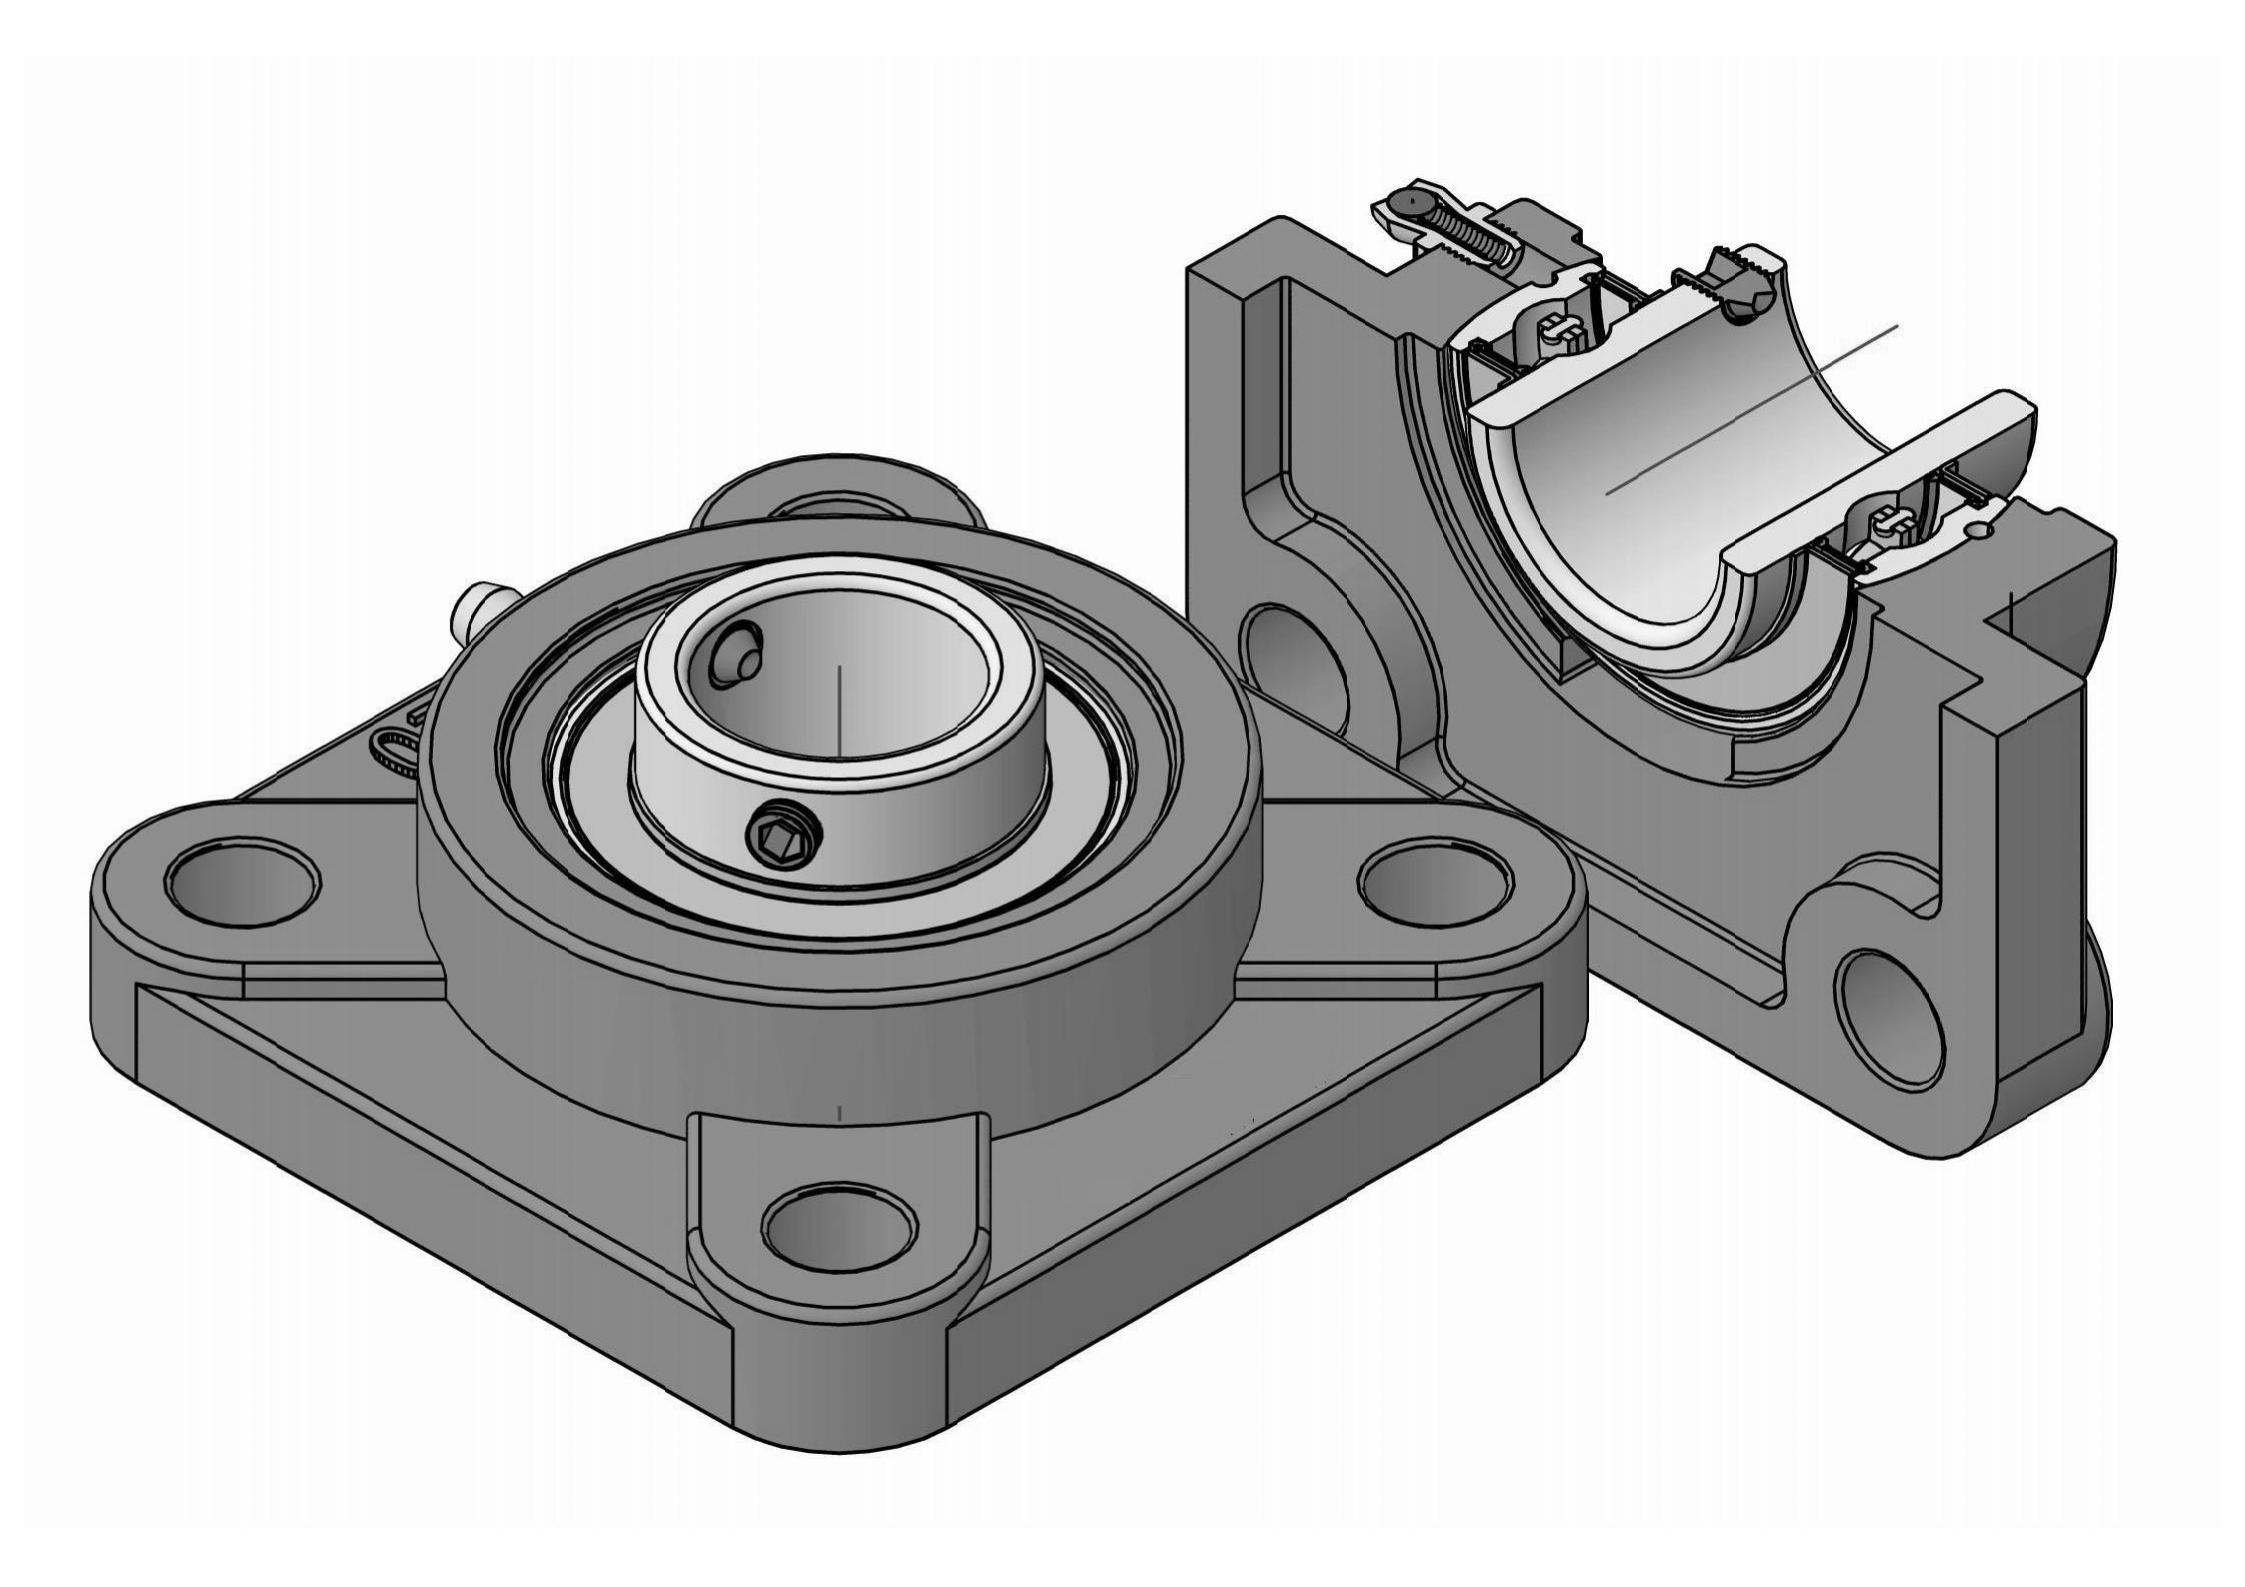 UCFX12-39 four Bolt Square flange bearing units with 2-7/16 inch bore